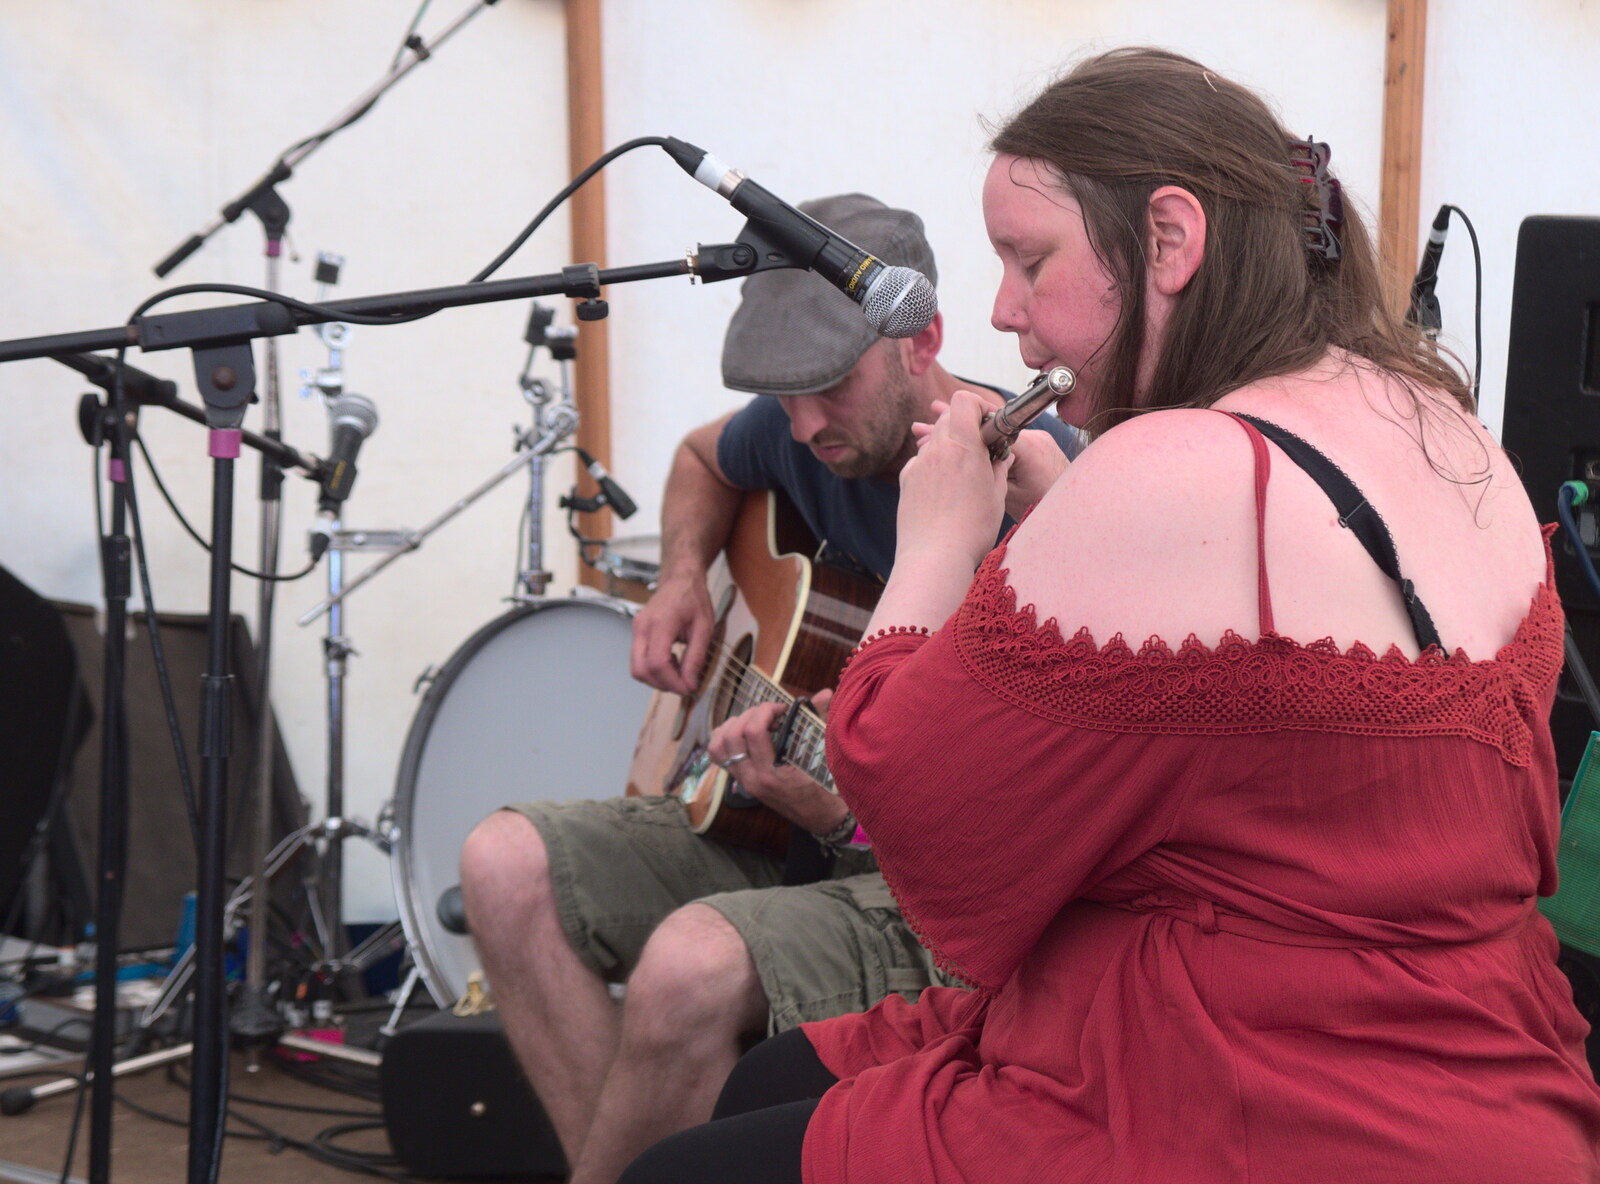 Guitar and flute from WoW Festival, Burston, Norfolk - 29th June - 1st July 2018